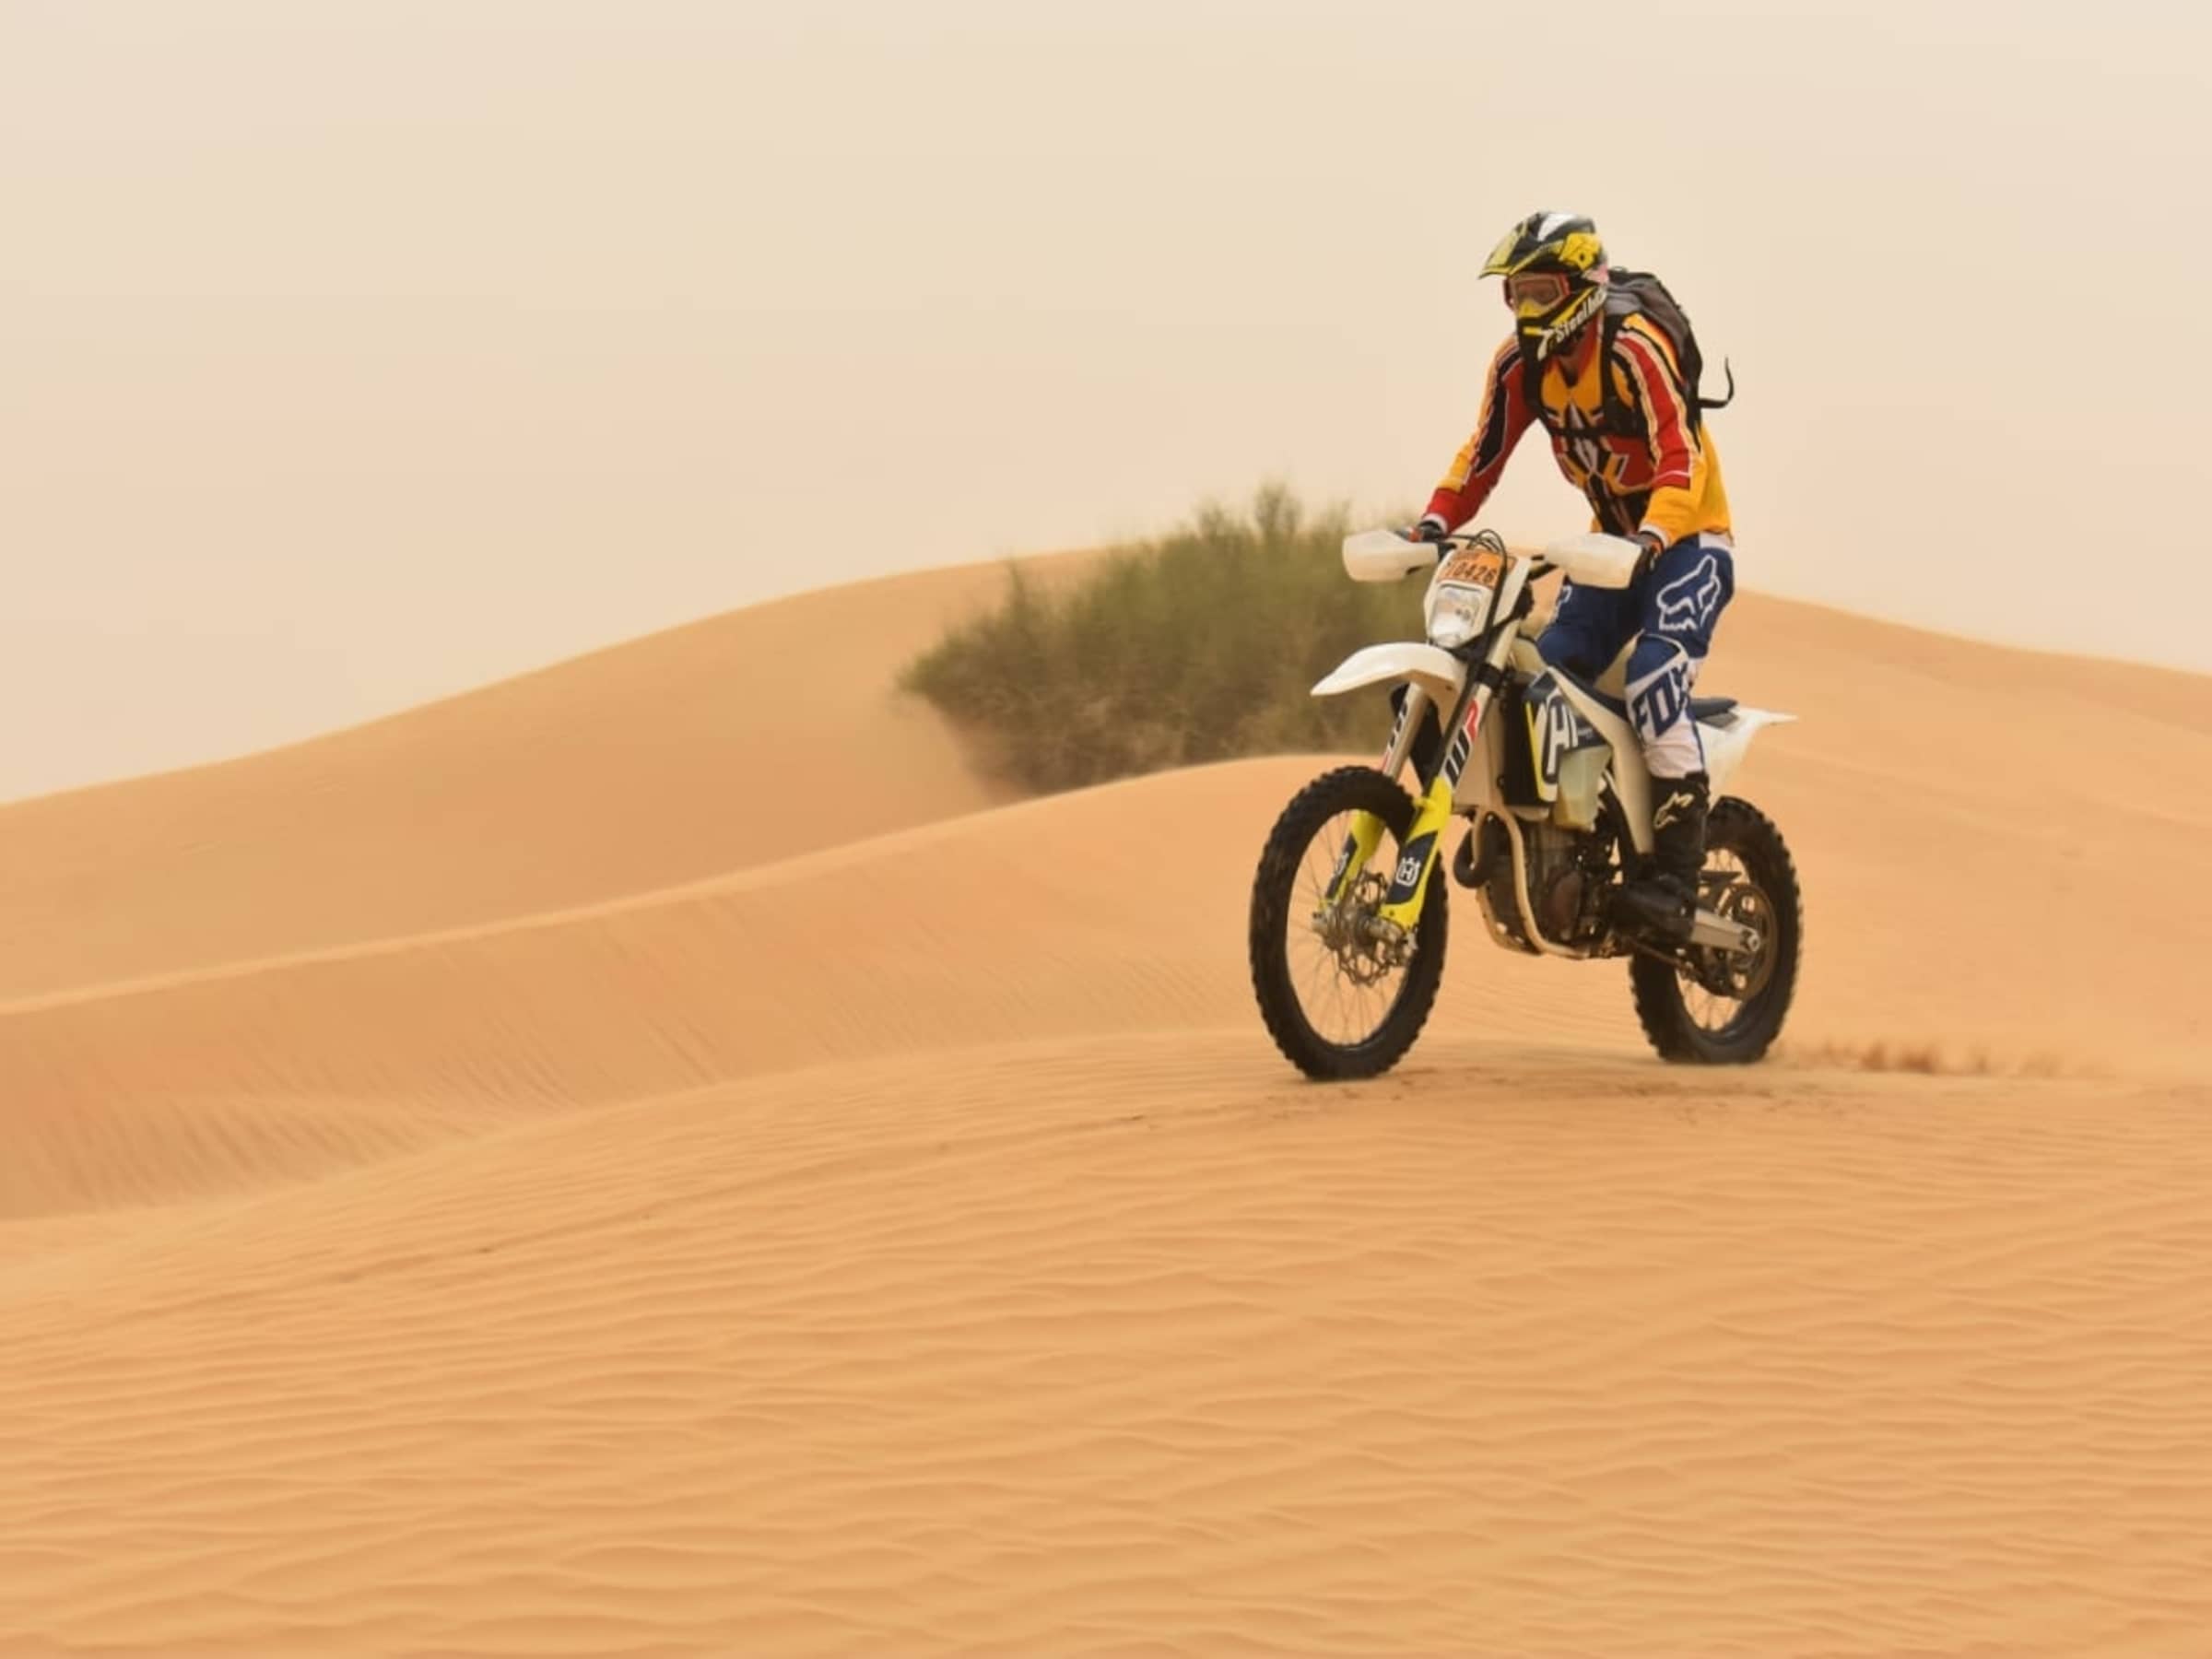 You are currently viewing Dirt Biking Dubai Experience Where to Find Them?